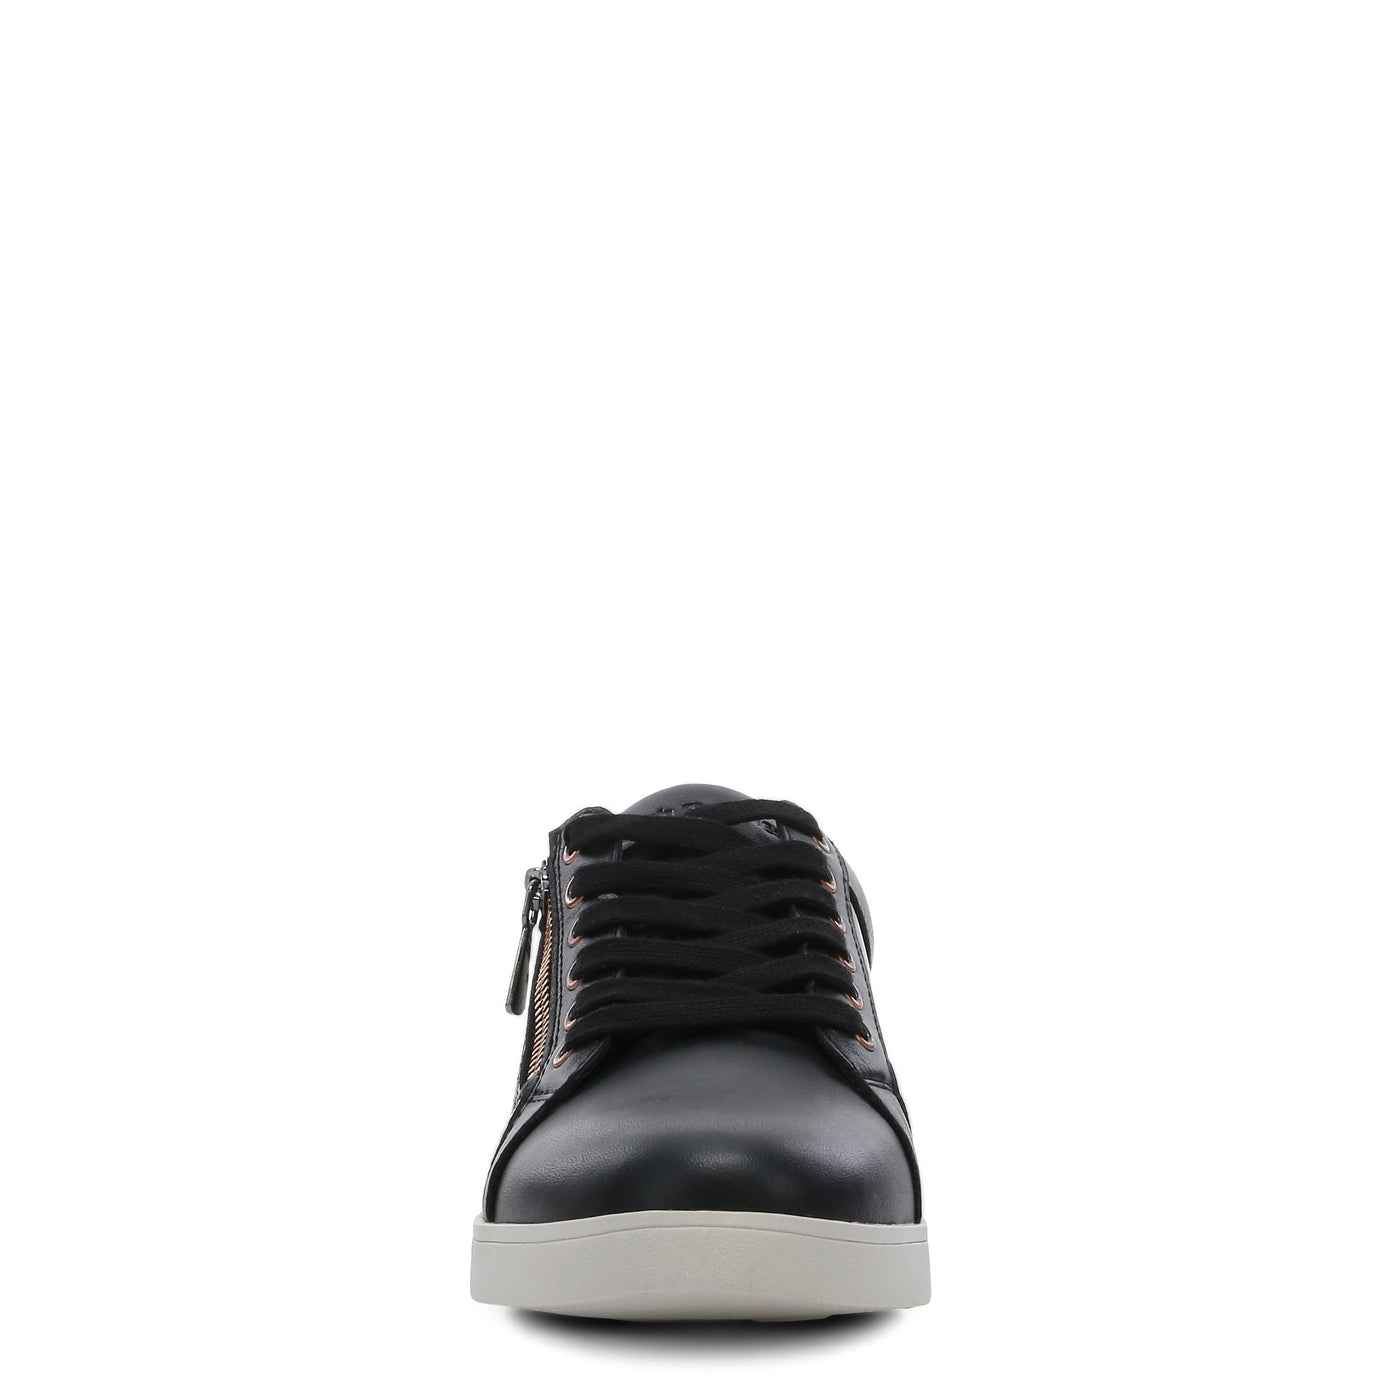 HUSH PUPPIES MIMOSA PERF BLACK COPPER - Women sneakers - Collective Shoes 